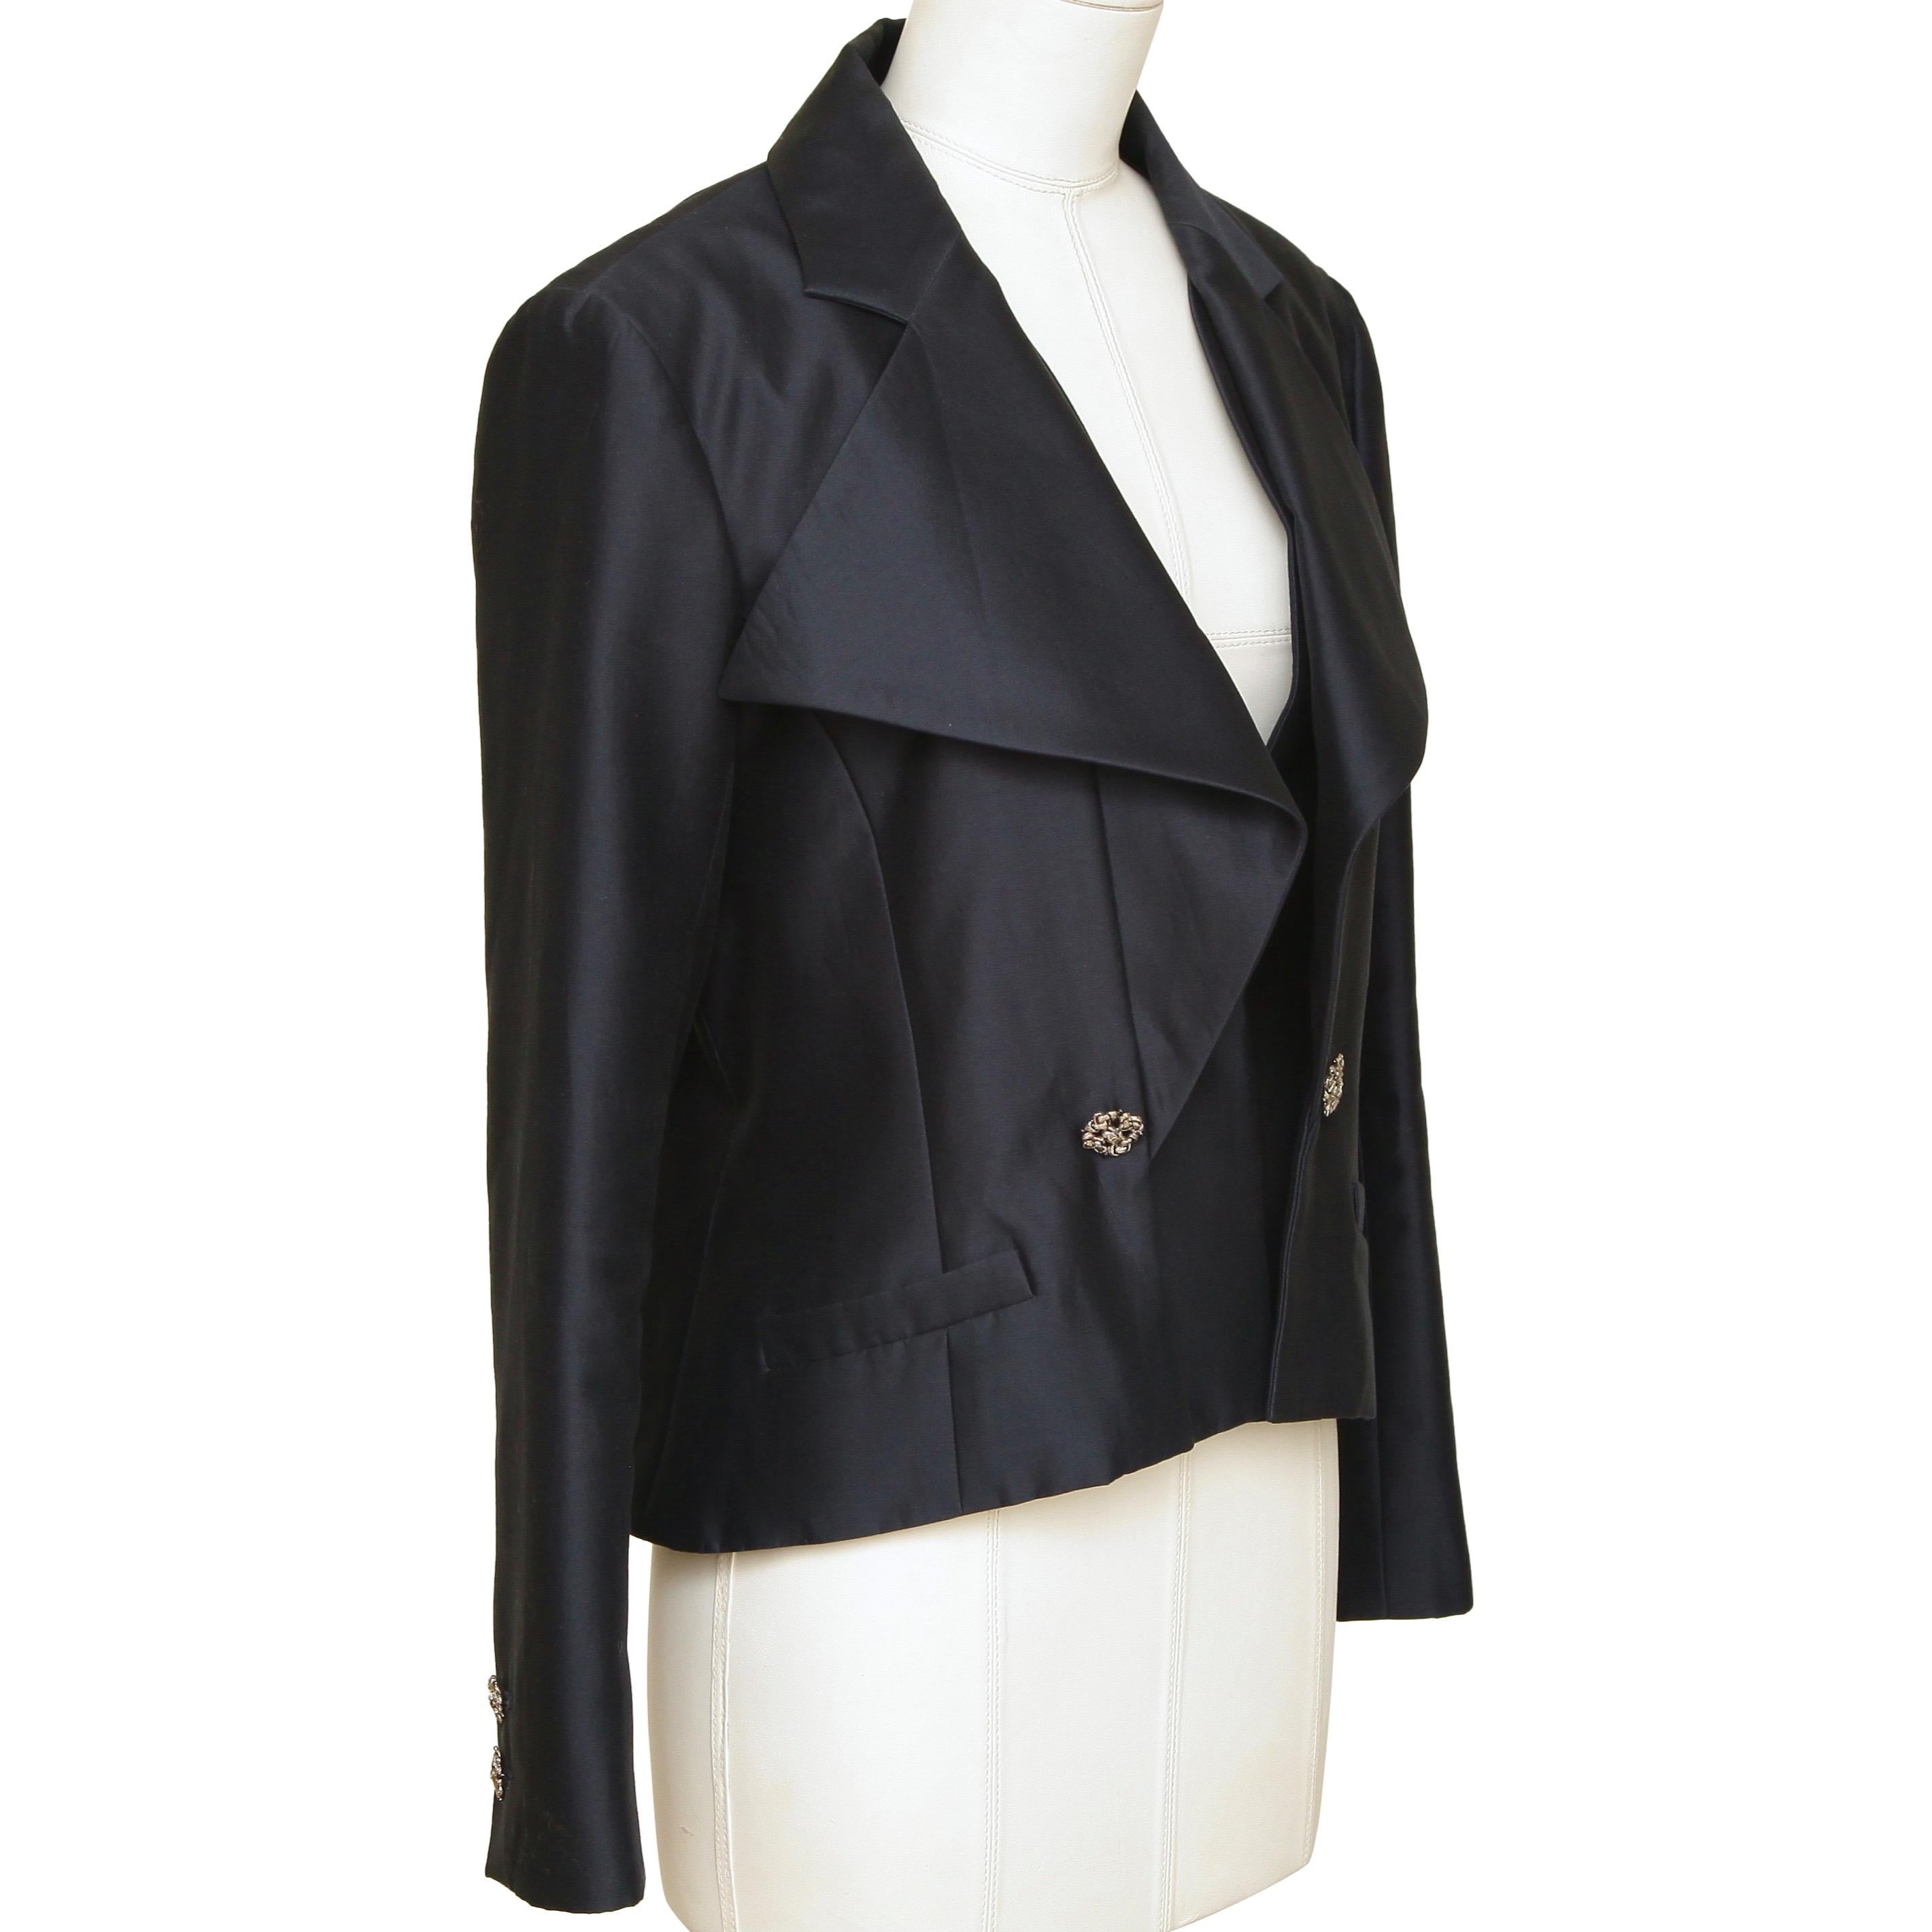 GUARANTEED AUTHENTIC CHANEL 14C COLLECTION NAVY BLUE JACKET

Retailed excluding sales taxes $5,100

Design:
- Navy blue jacket from the 14C collection.
- Pointed collar.
- Long sleeve, buttons at cuff.
- Front button closure.
- Front slip pockets.
-